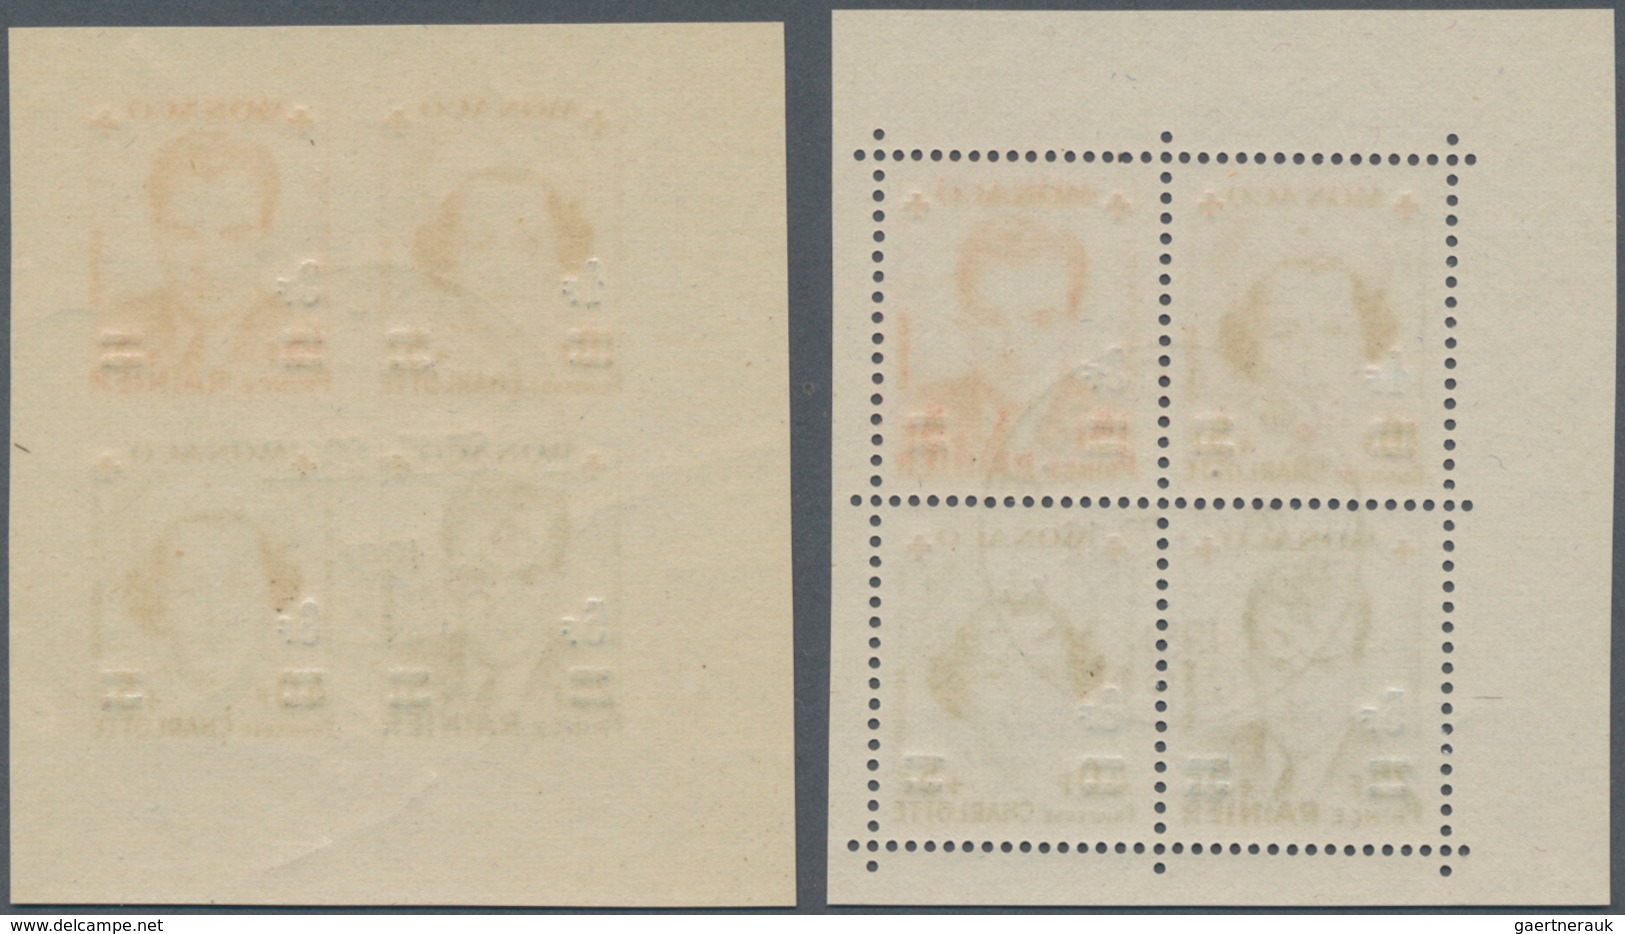 Monaco: 1951, RED CROSS Surcharges Two Sets In Se-tenant Perforate And IMPERFORATE Blocks With Margi - Unused Stamps